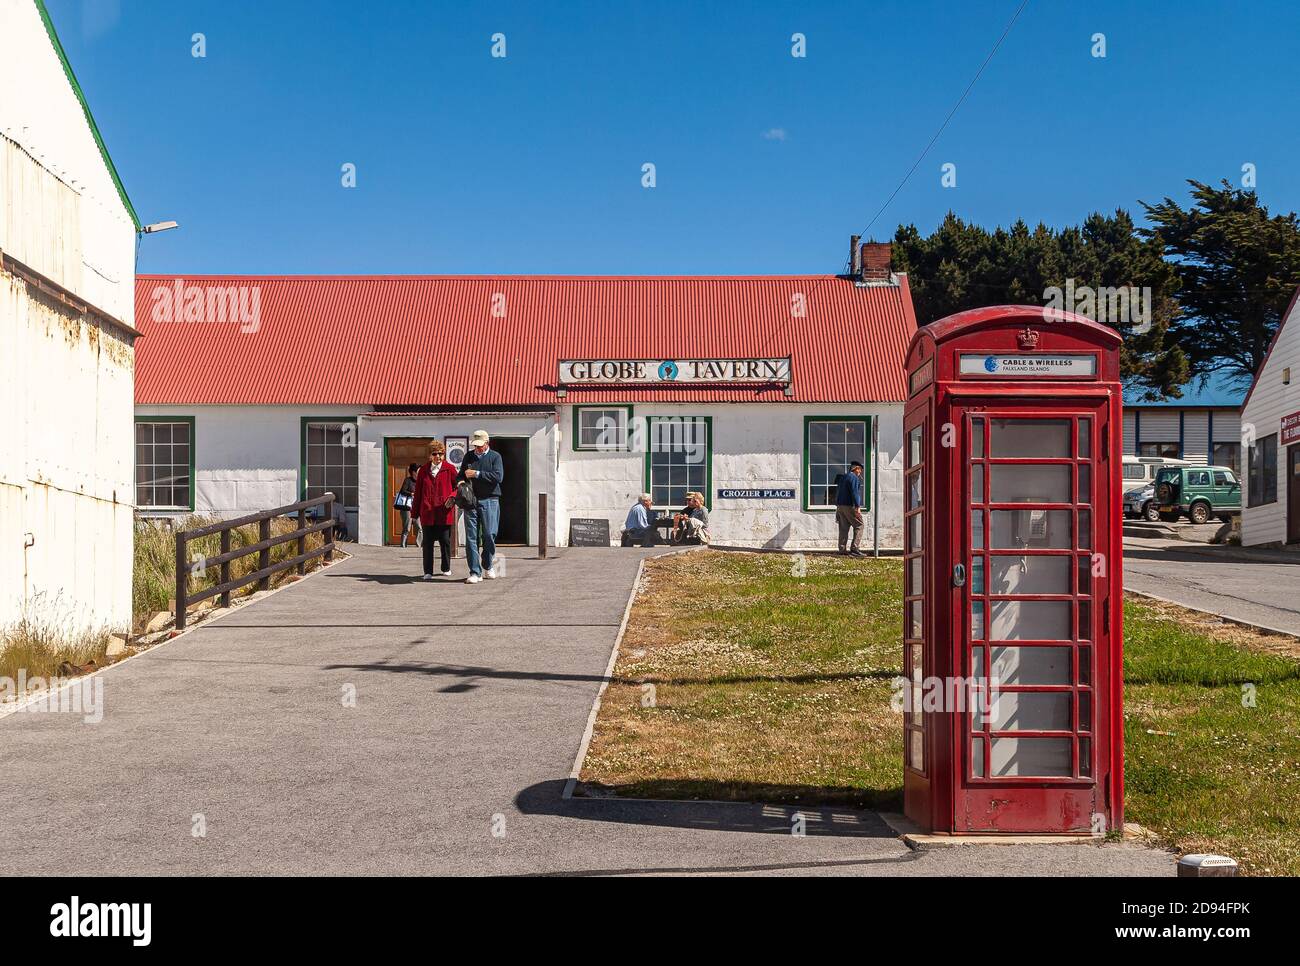 Stanley, Falkland Islands, UK - December 15, 2008: Globe Tavern as white building with red roof under full blue sky, with classic English telephone bo Stock Photo